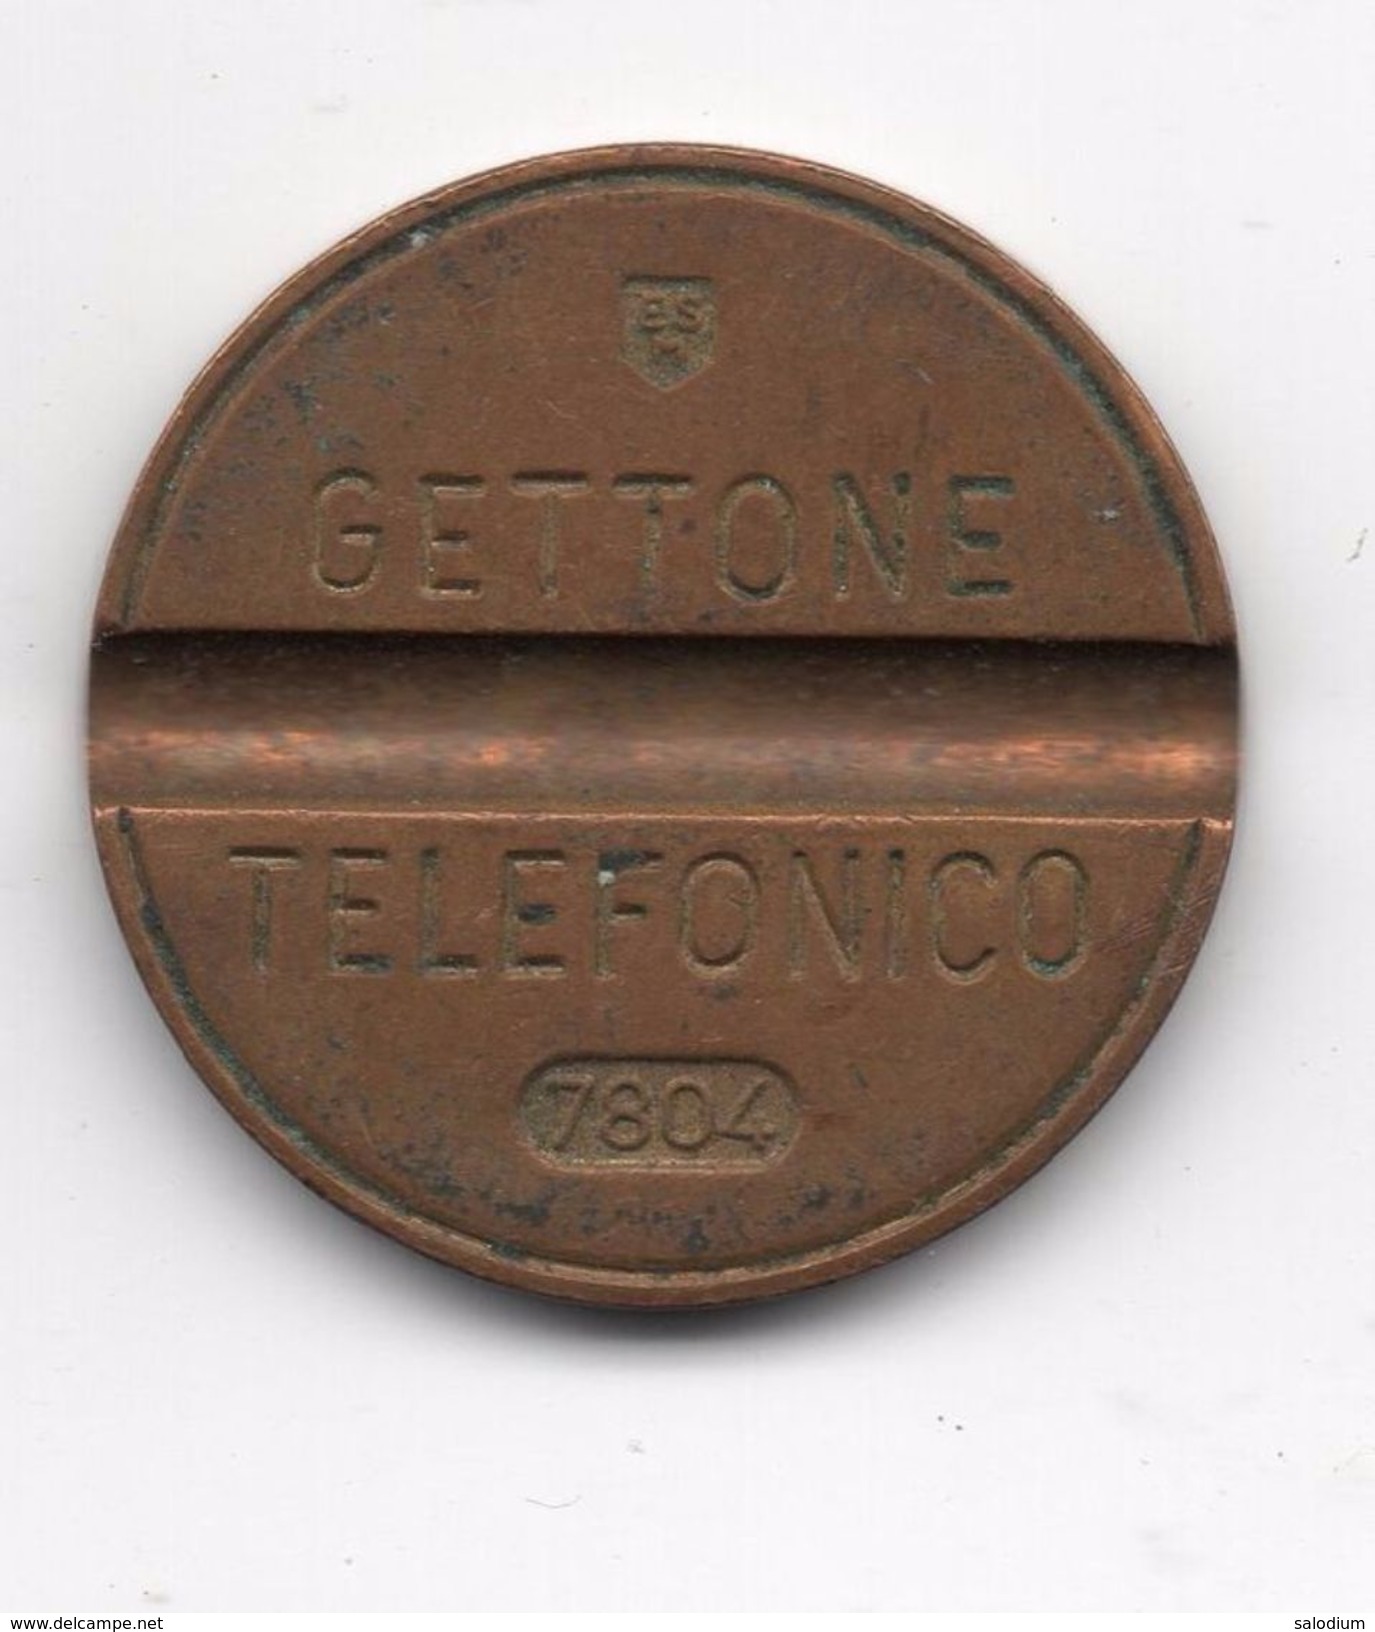 Gettone Telefonico 7804 Token Telephone - (Id-779) - Professionals/Firms